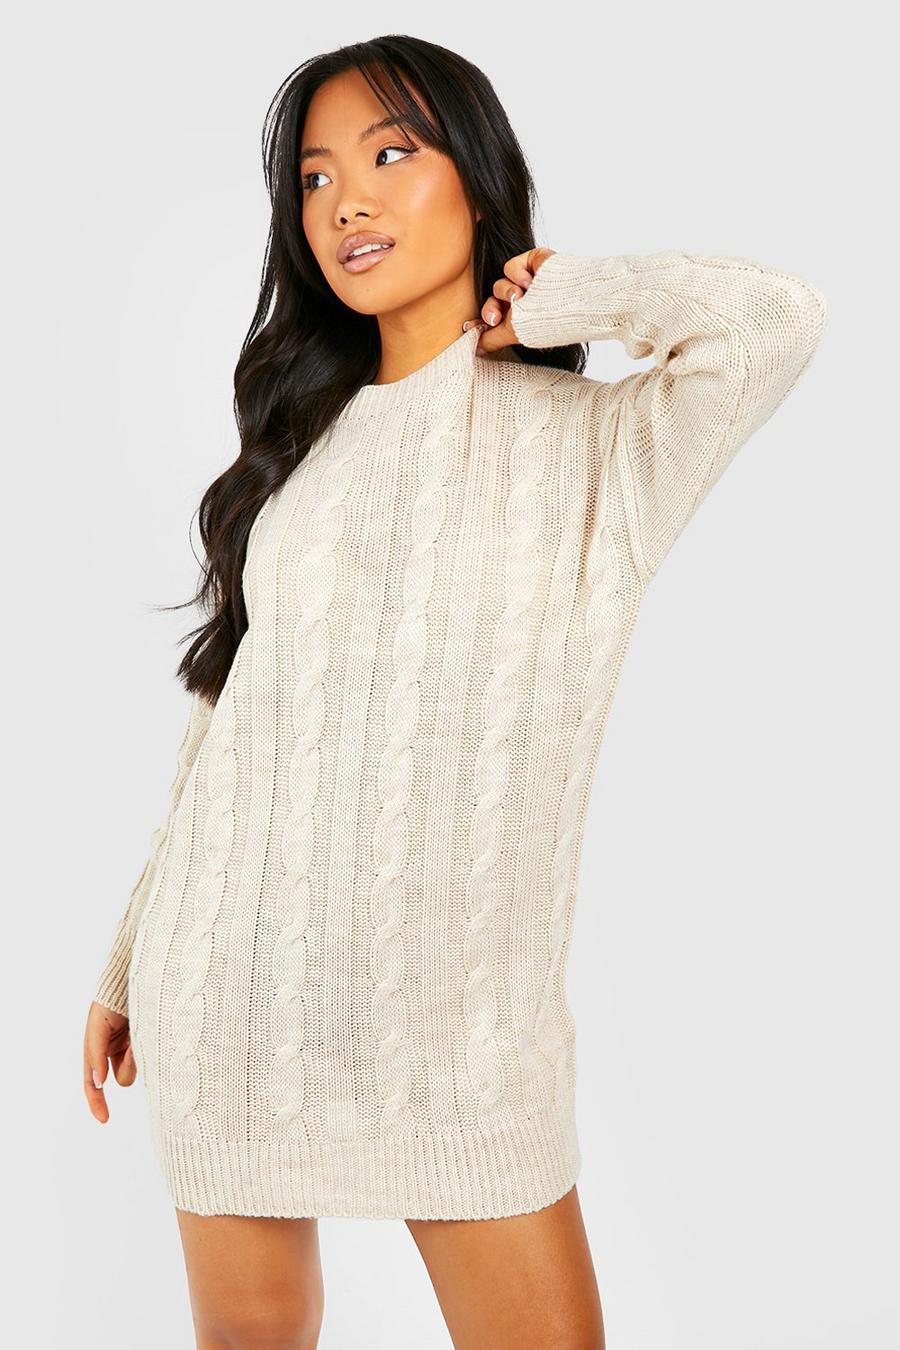 Oatmeal Petite Round Neck Cable Knit Sweater Dress